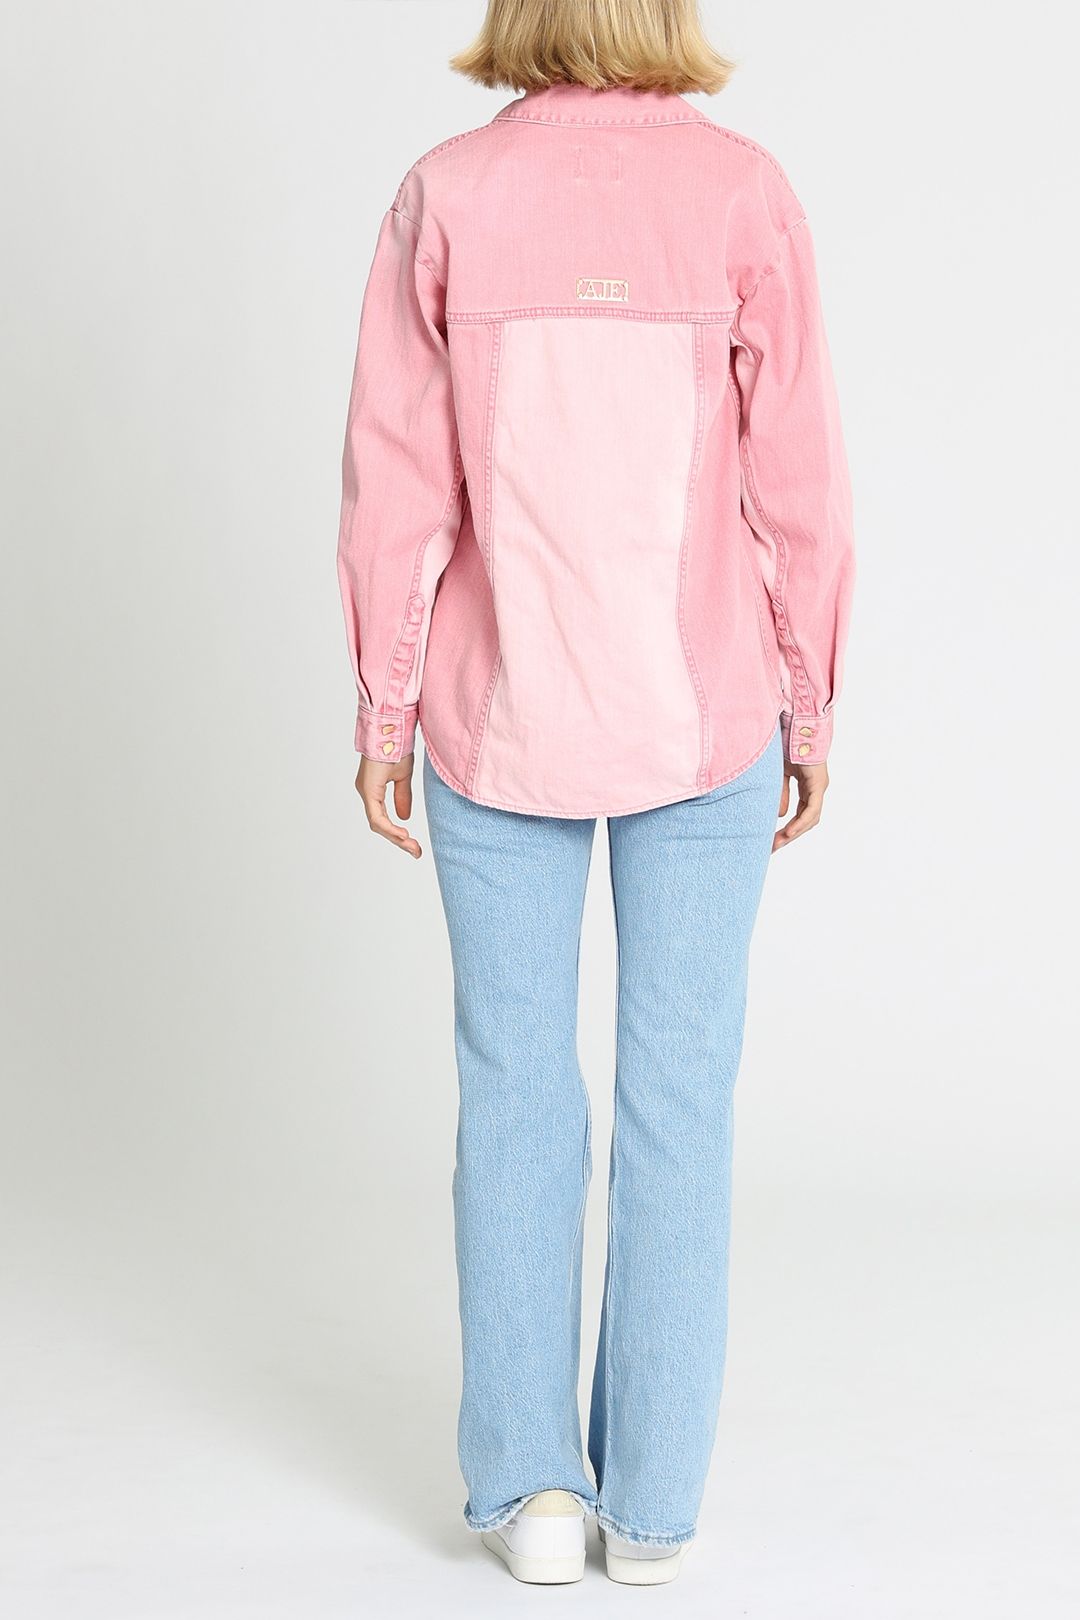 Aje Shades Pink Denim Shirt Relaxed